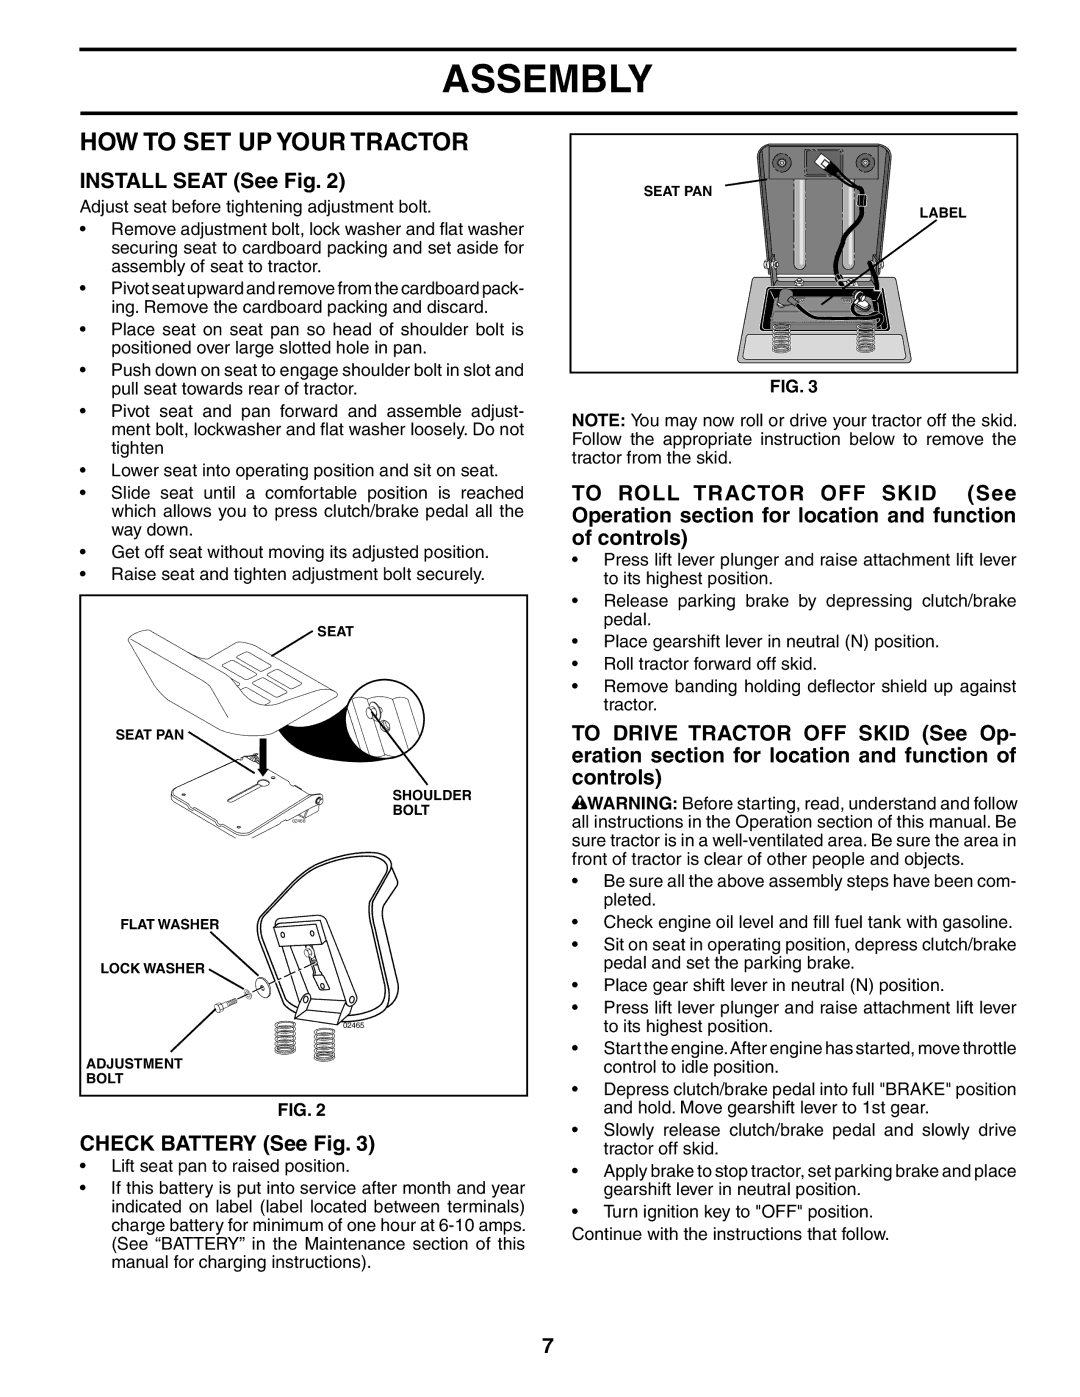 Poulan PO13T38A manual HOW to SET UP Your Tractor, Install Seat See Fig, Check Battery See Fig 